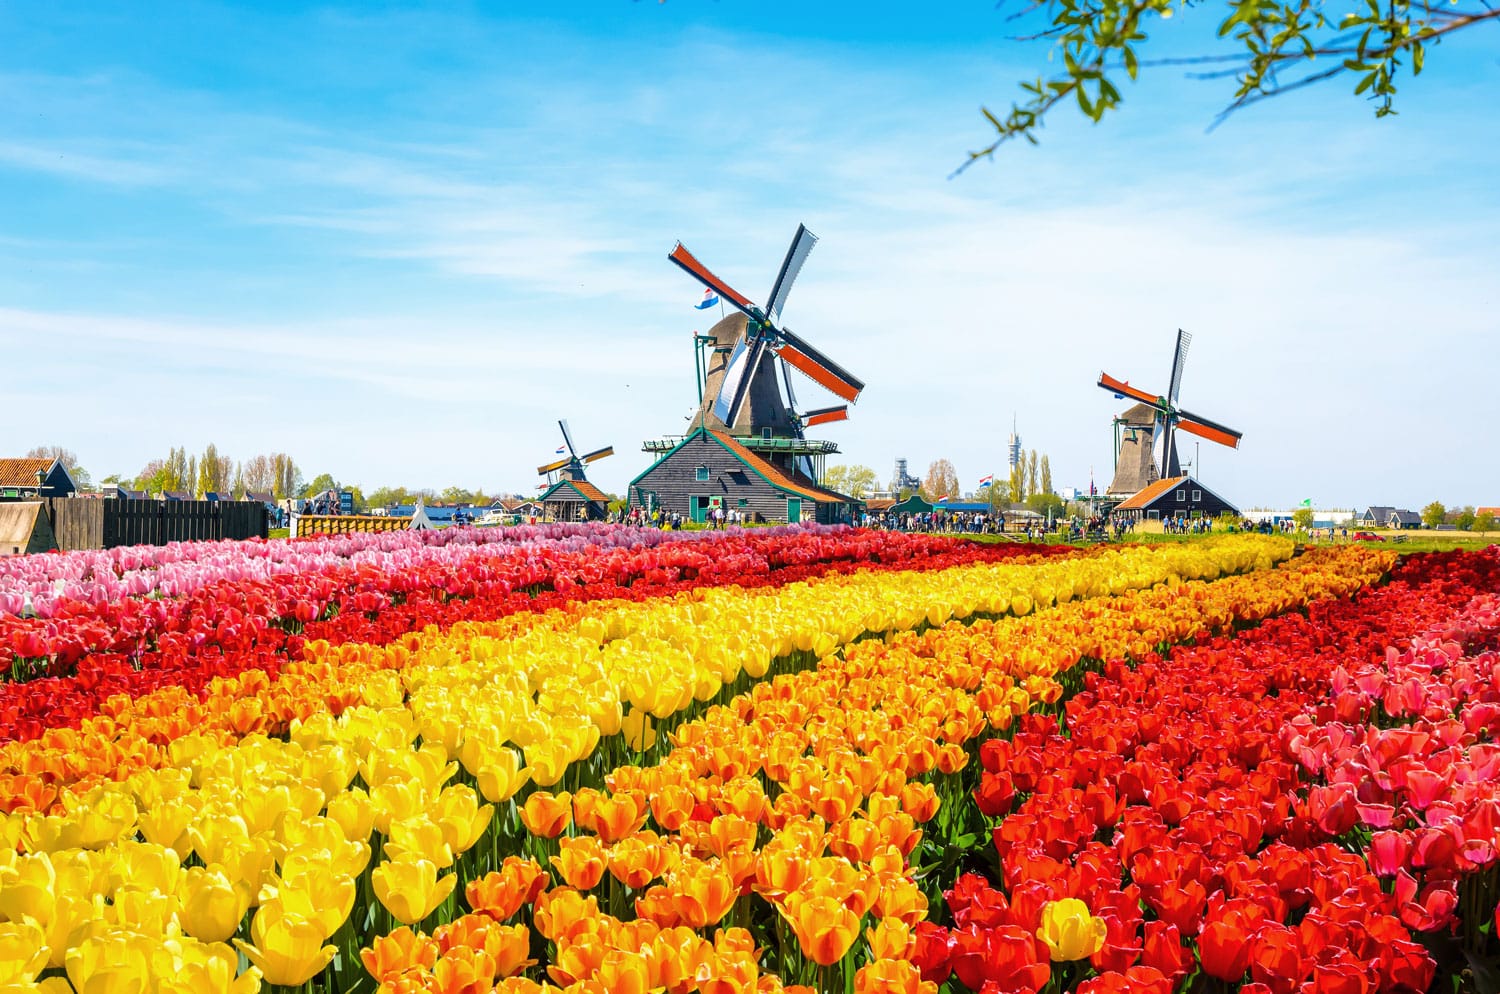 Beautiful landscape with tulips, traditional dutch windmills and houses near the canal in Zaanse Schans, Netherlands